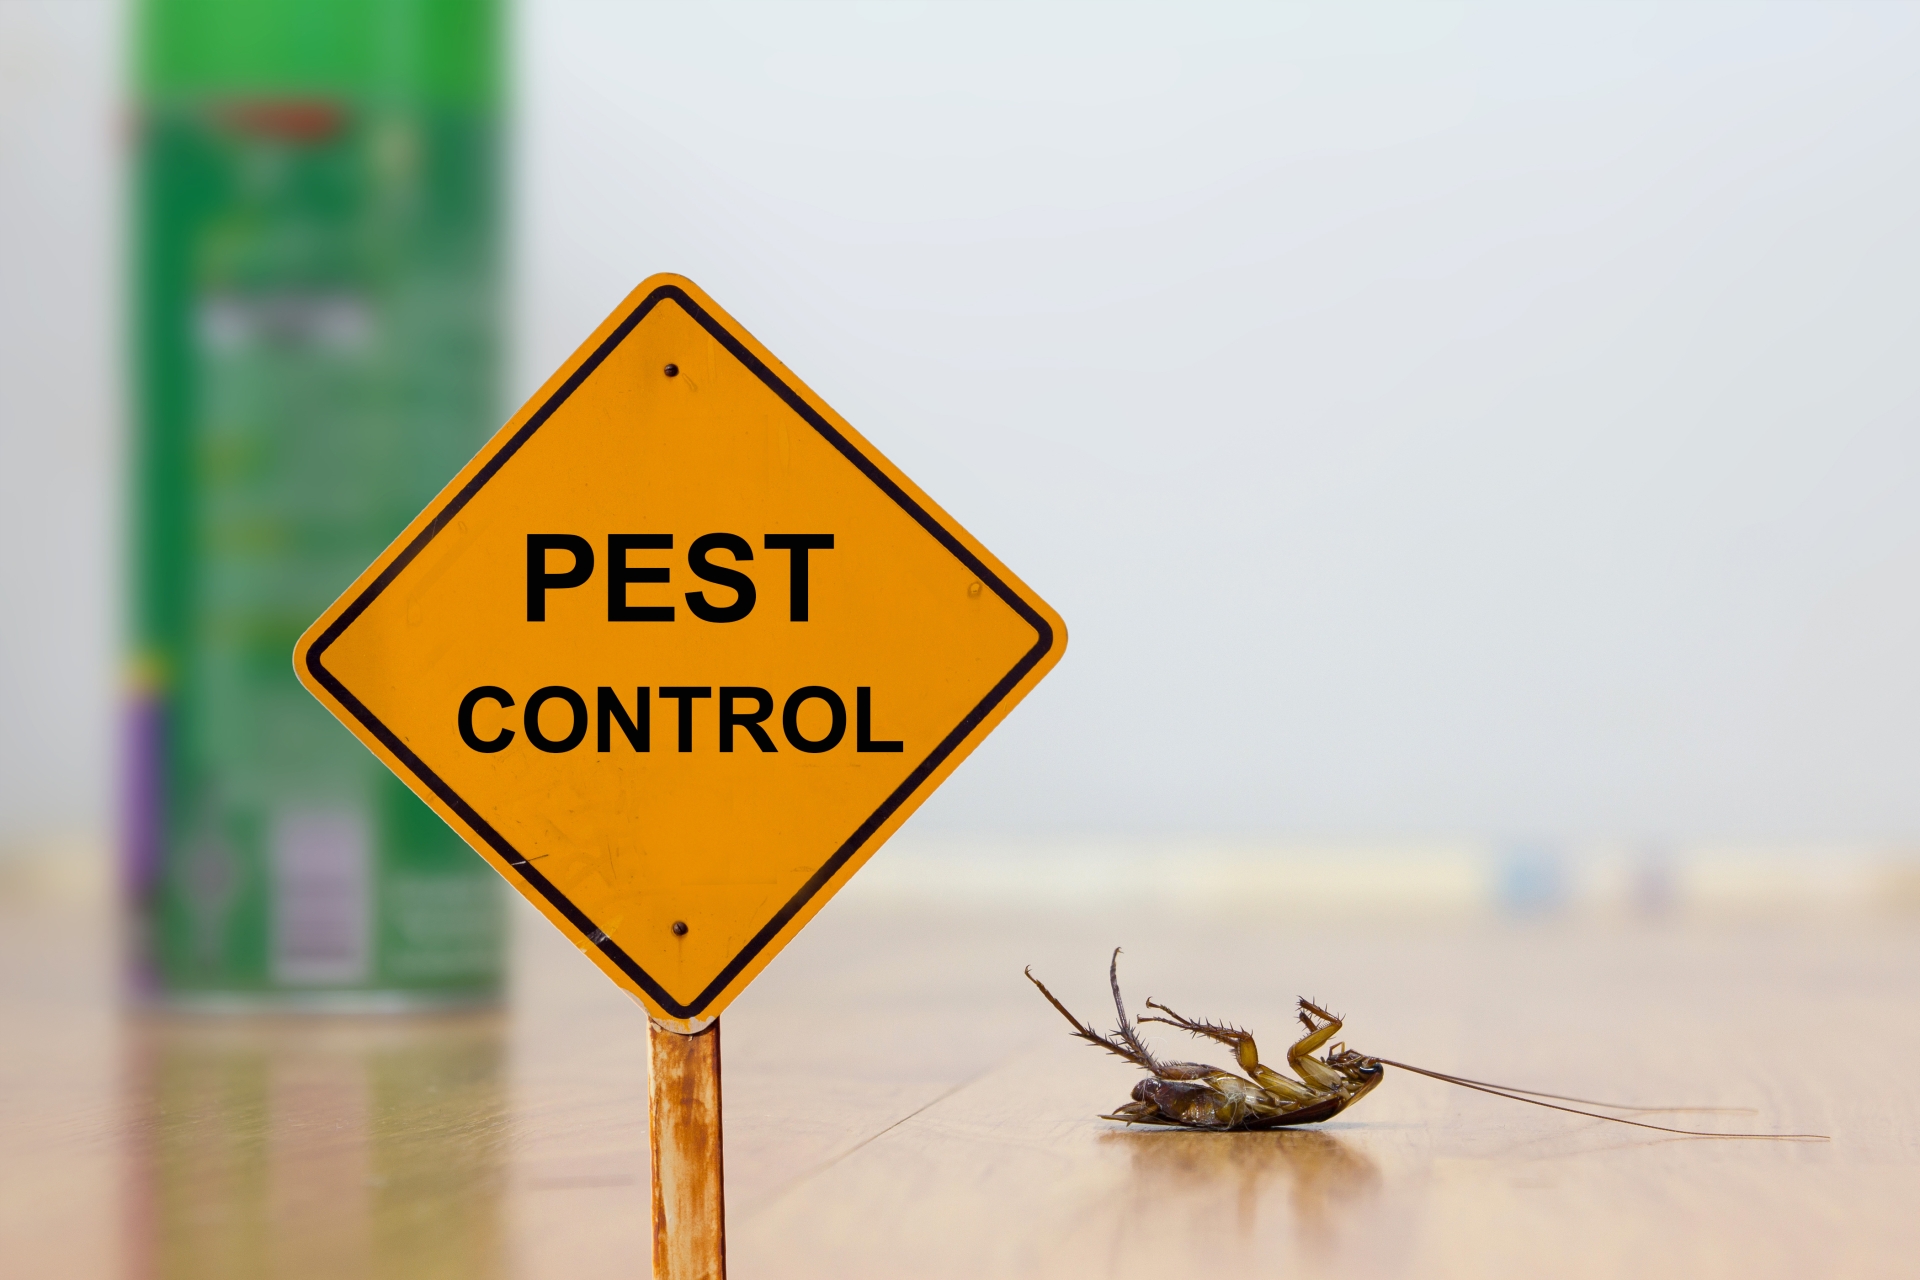 24 Hour Pest Control, Pest Control in Winchmore Hill, N21. Call Now 020 8166 9746